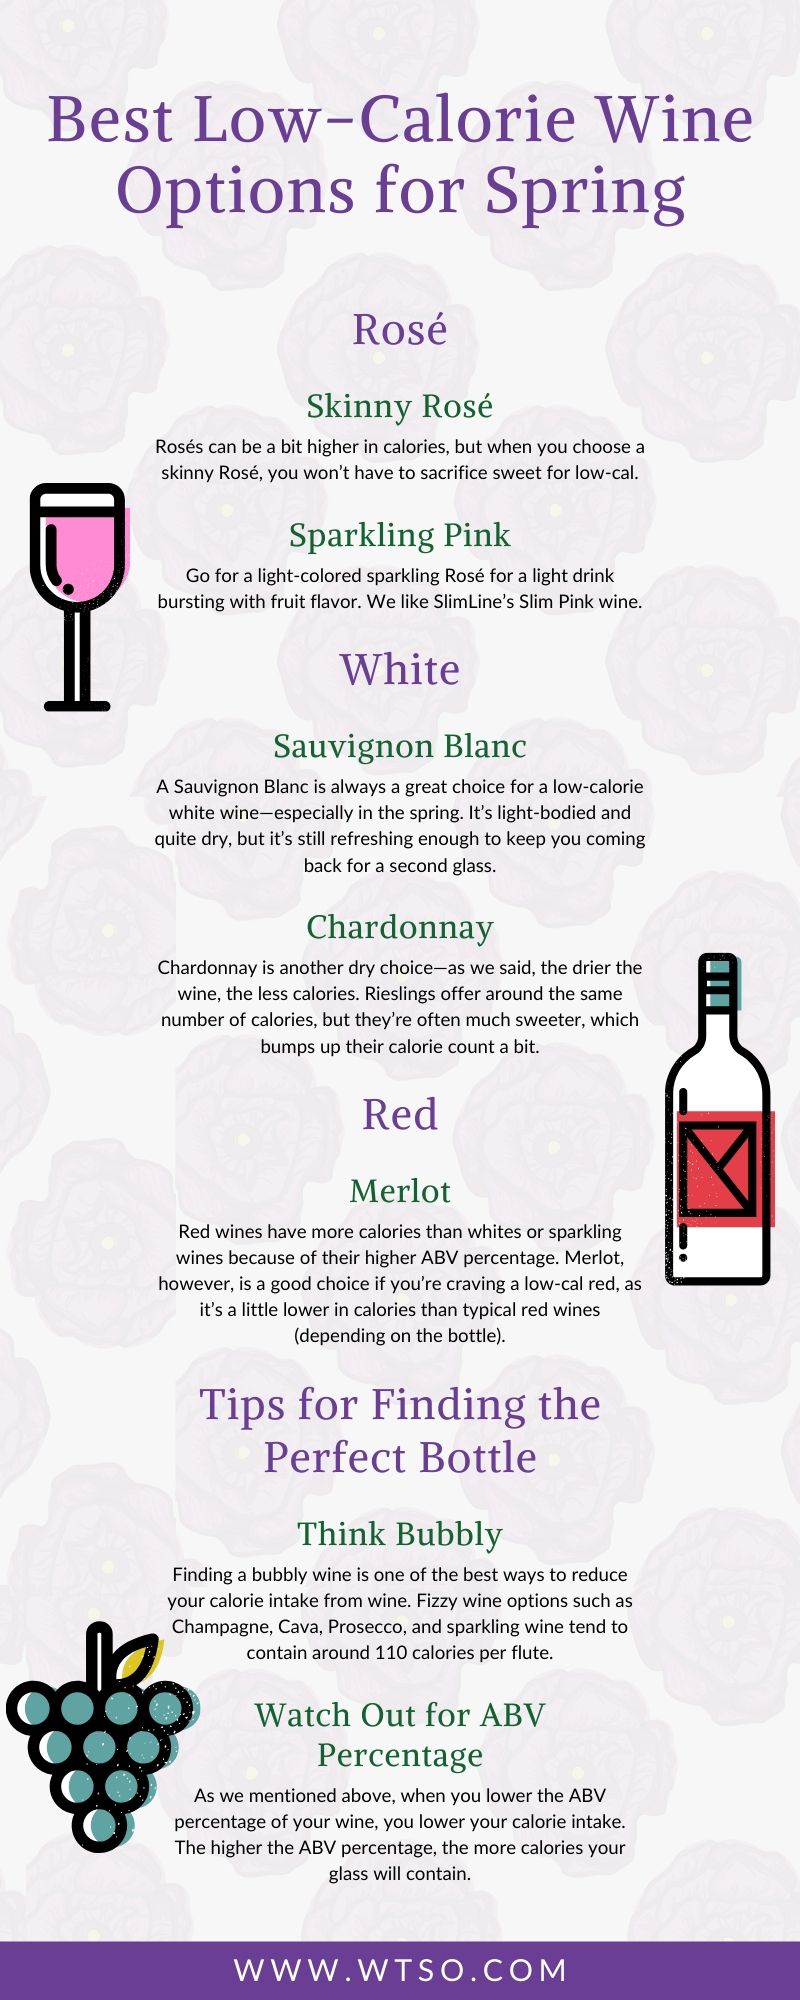 Best Low-Calorie Wine Options for Spring